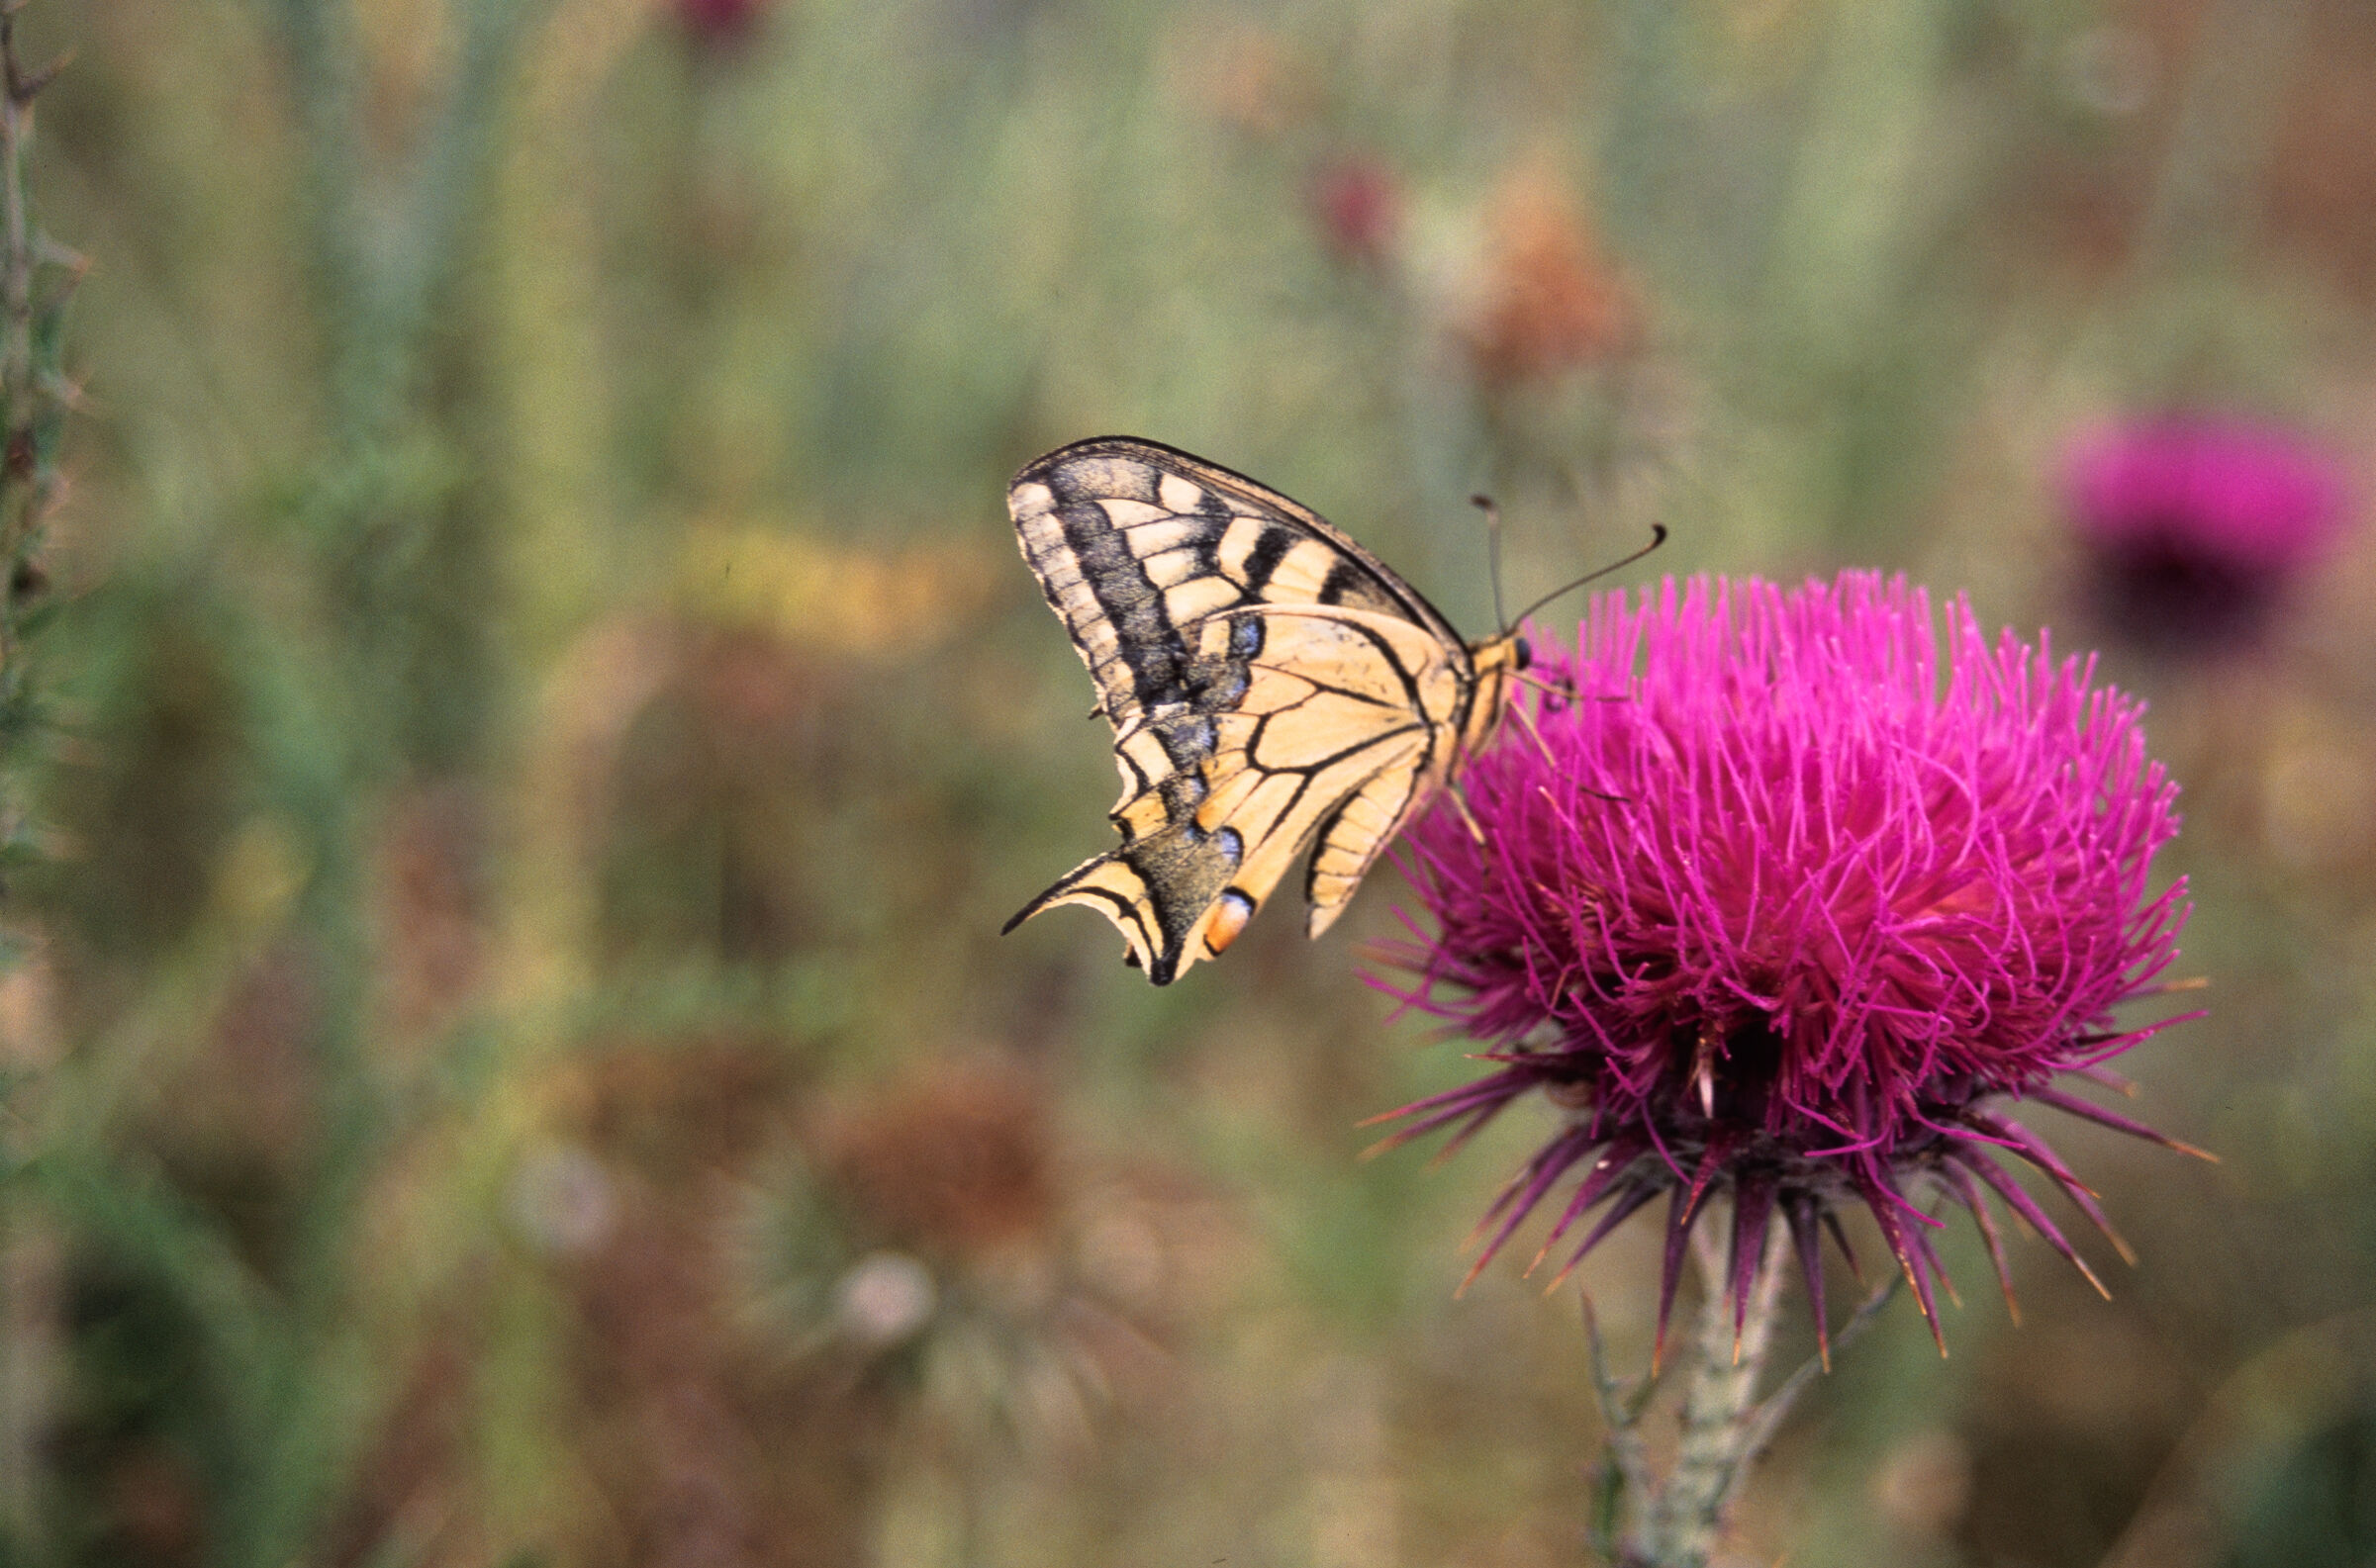 A butterfly landing on a thistle in Ugarit, Syria